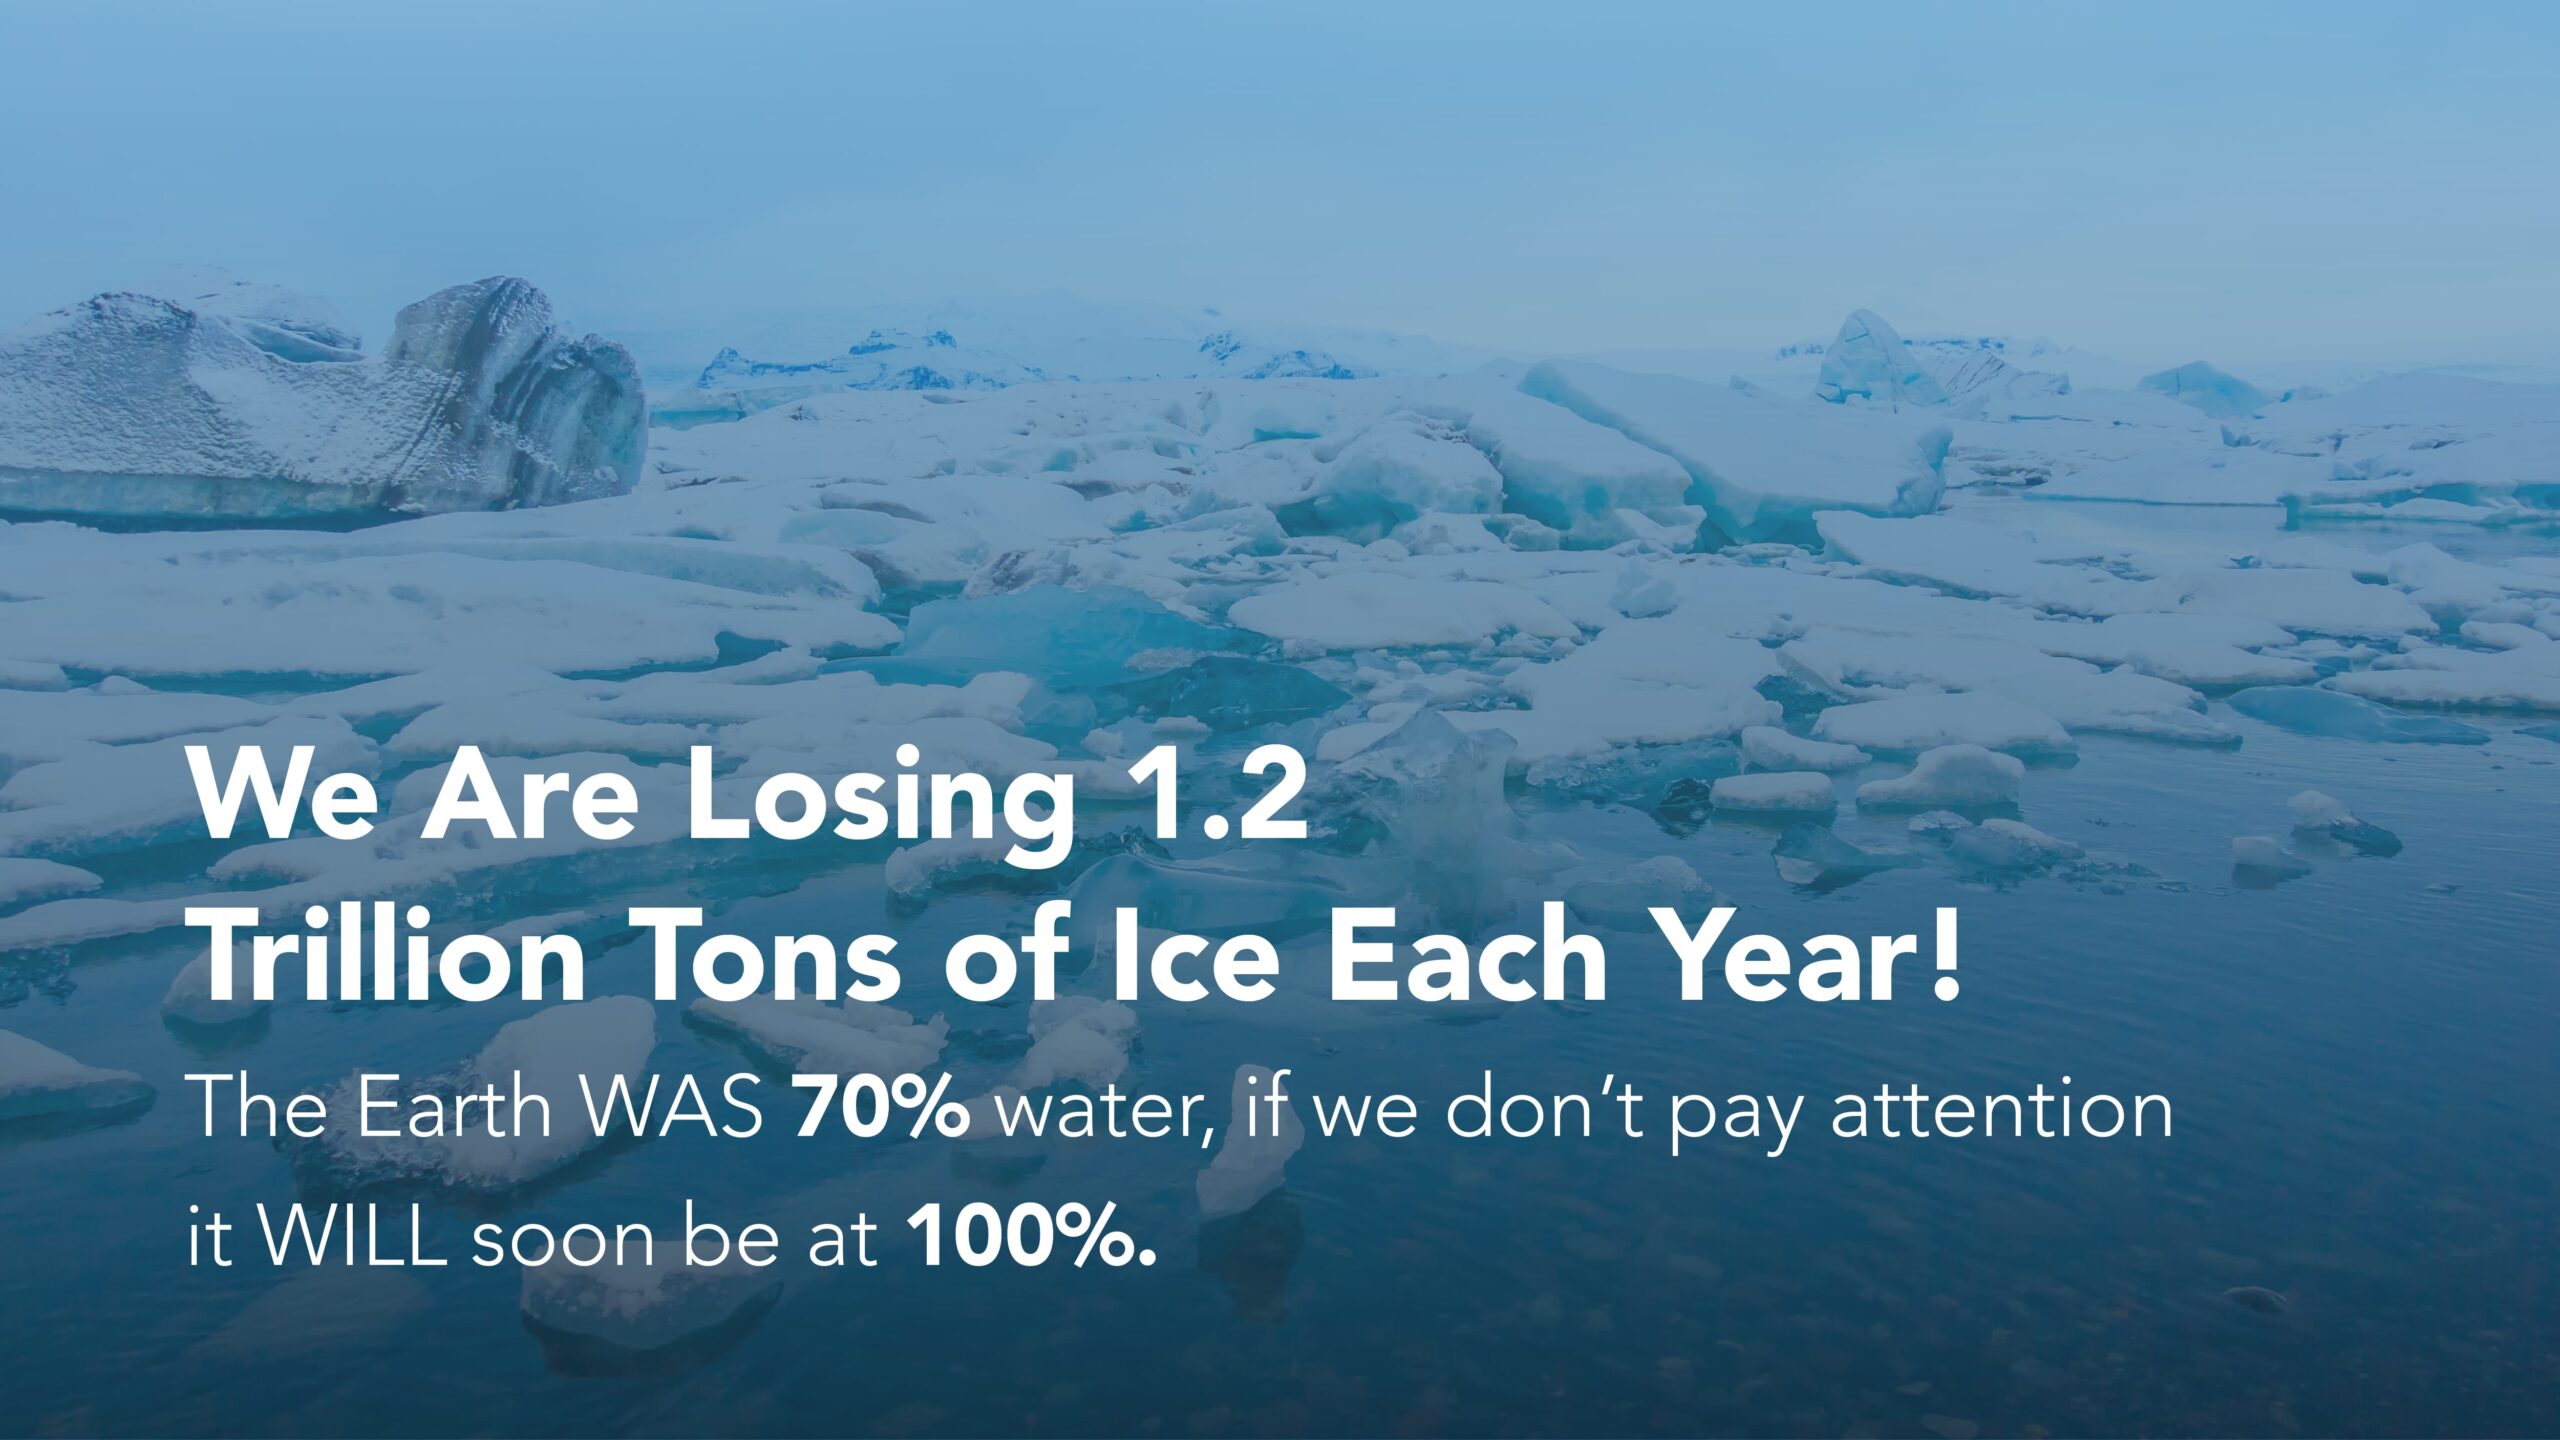 We are Losing 1.2 Trillion Tons of Ice Each Year